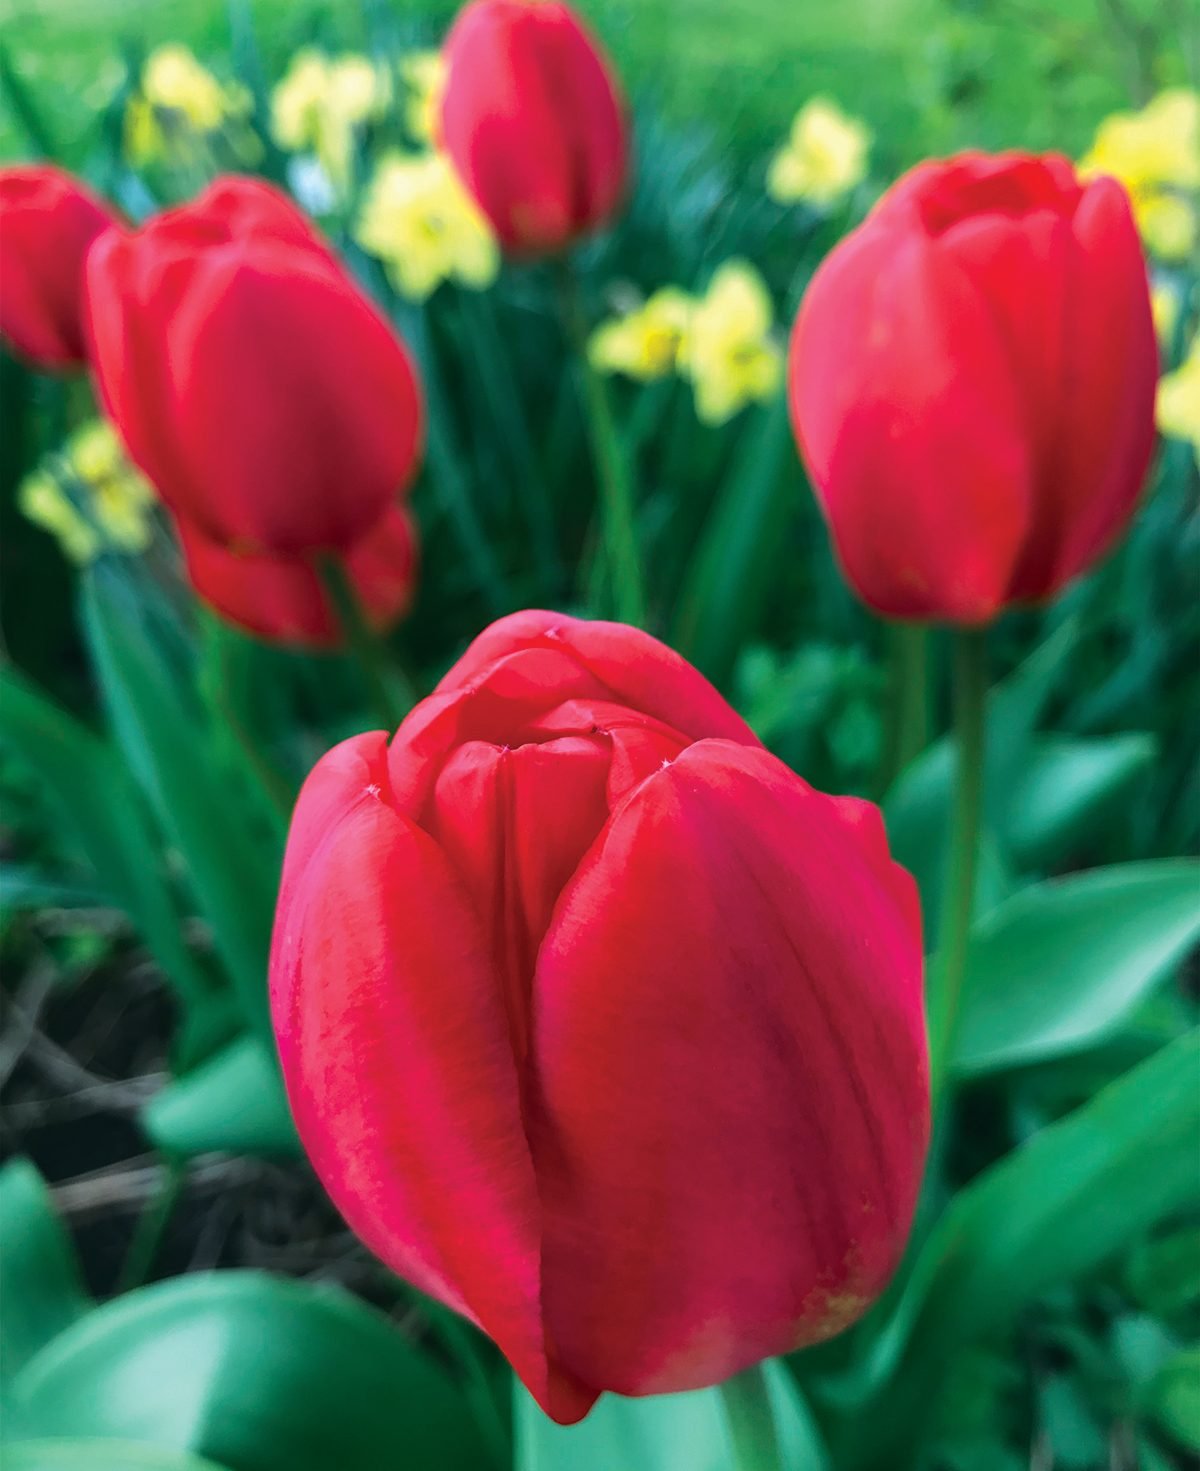 Flower Picture Gallery - Red Tulip